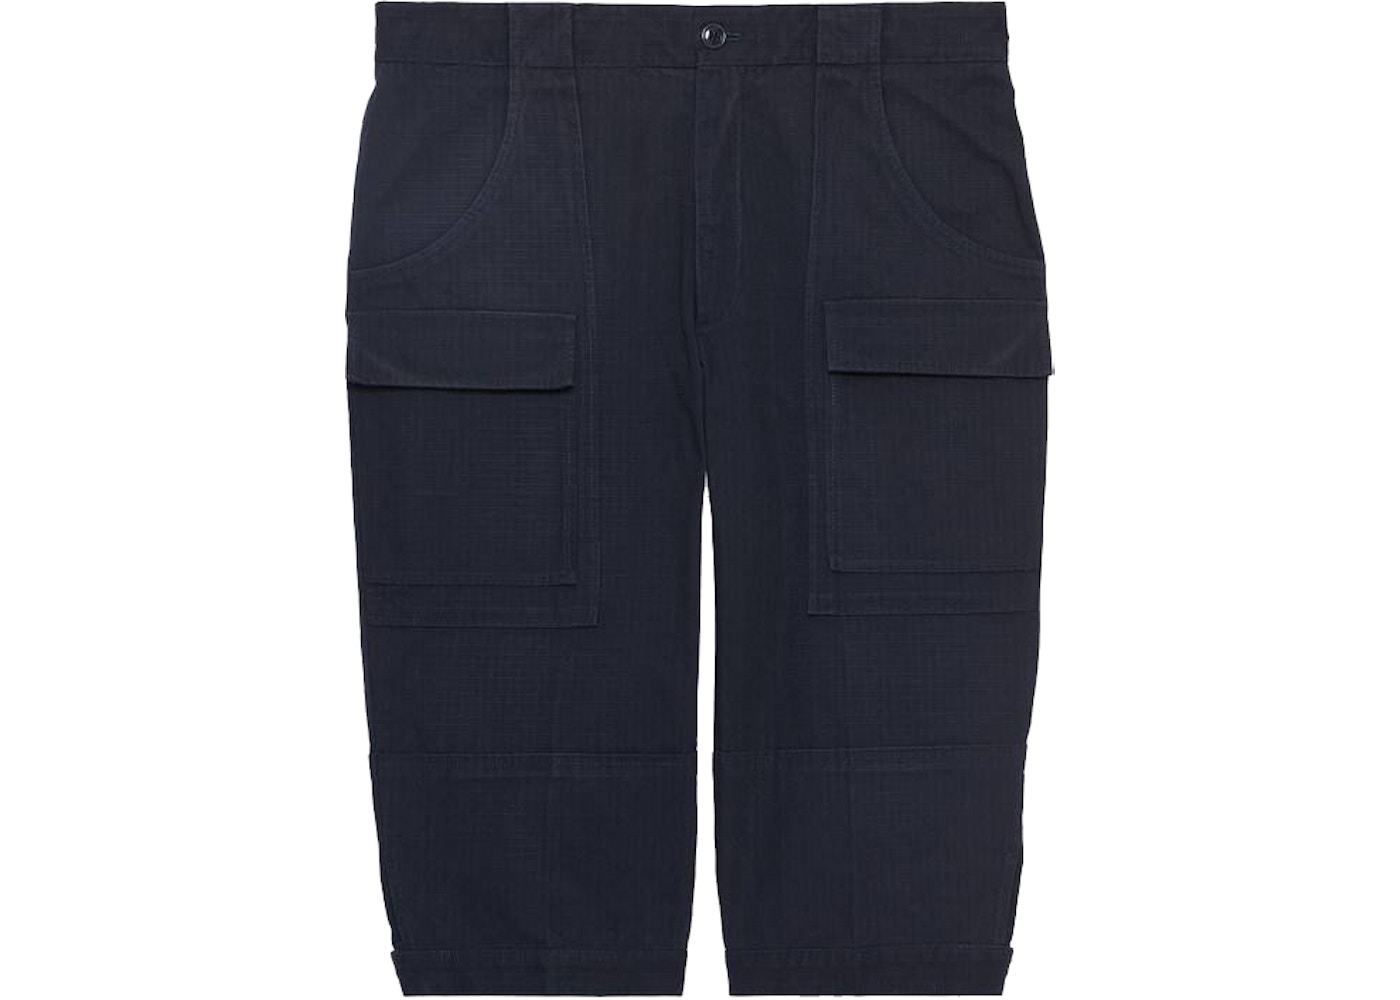 Gucci x The North Face Nylon Cropped Pant Navy - SS21